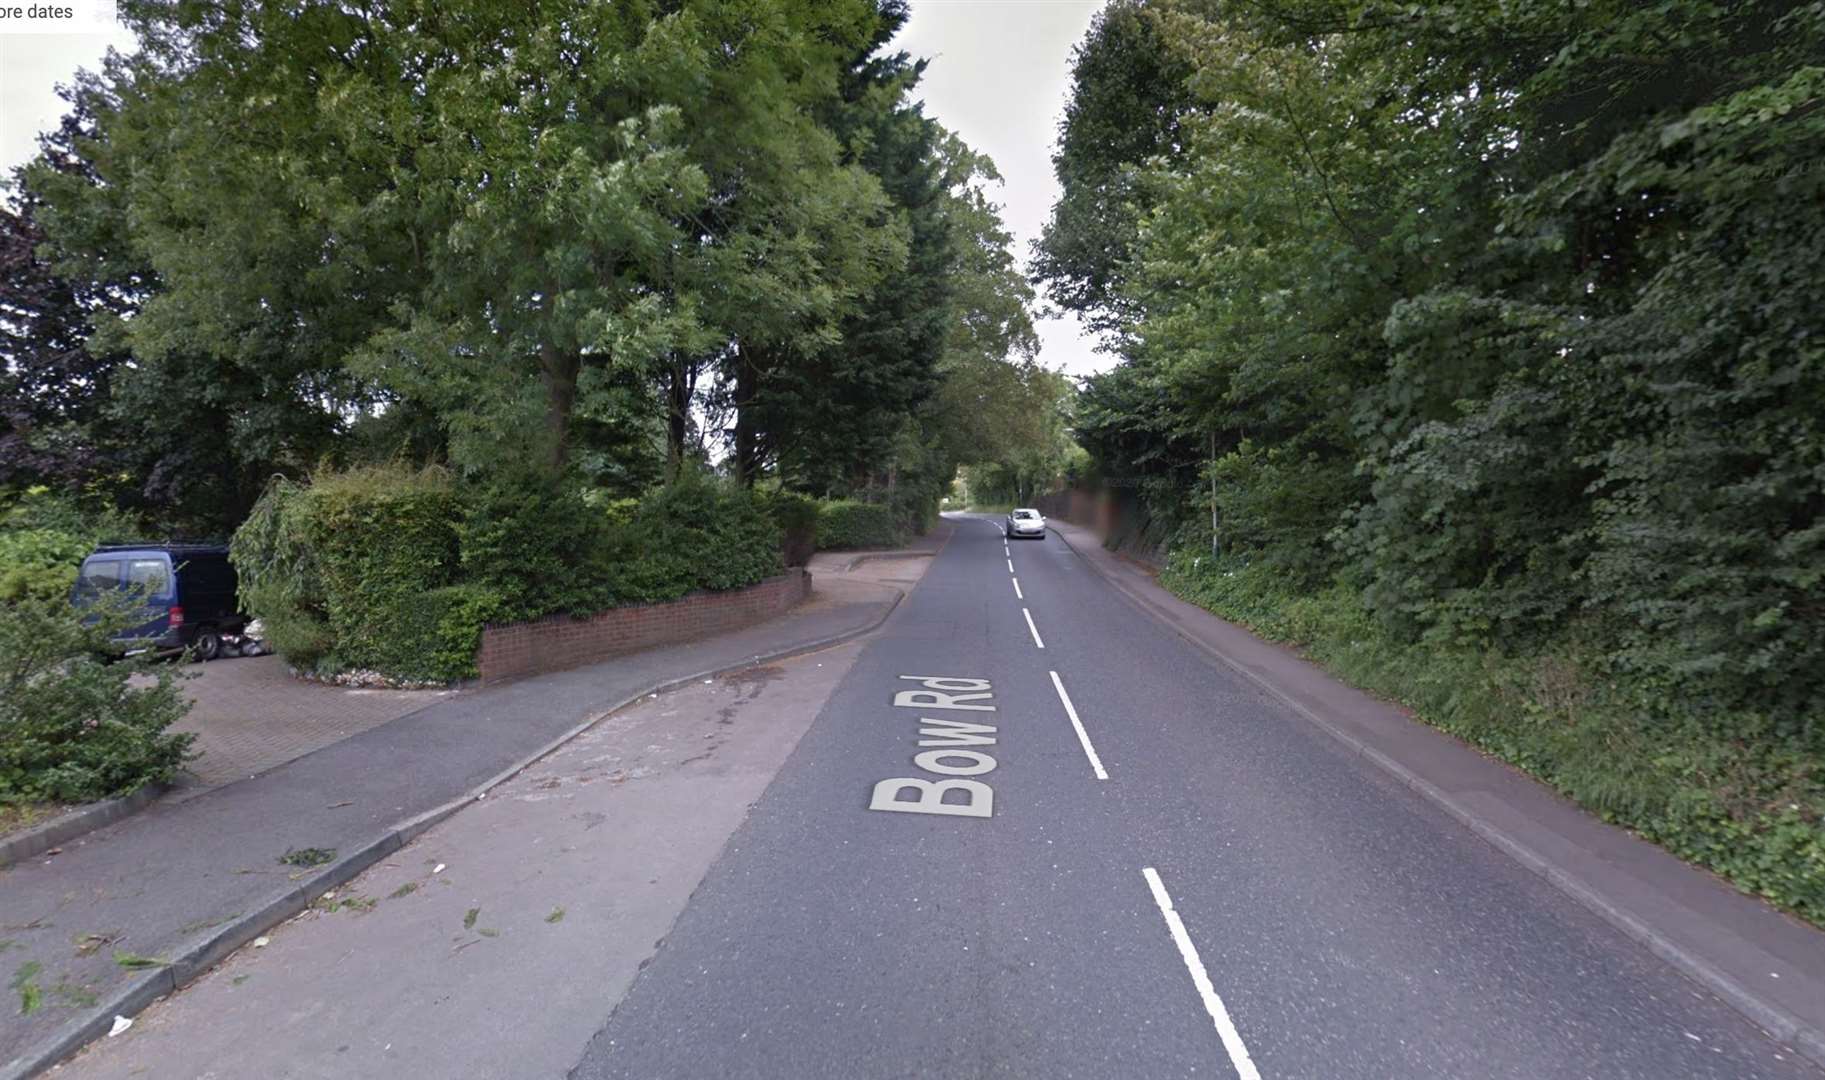 The incident took place in Bow Road. Picture: Google Maps